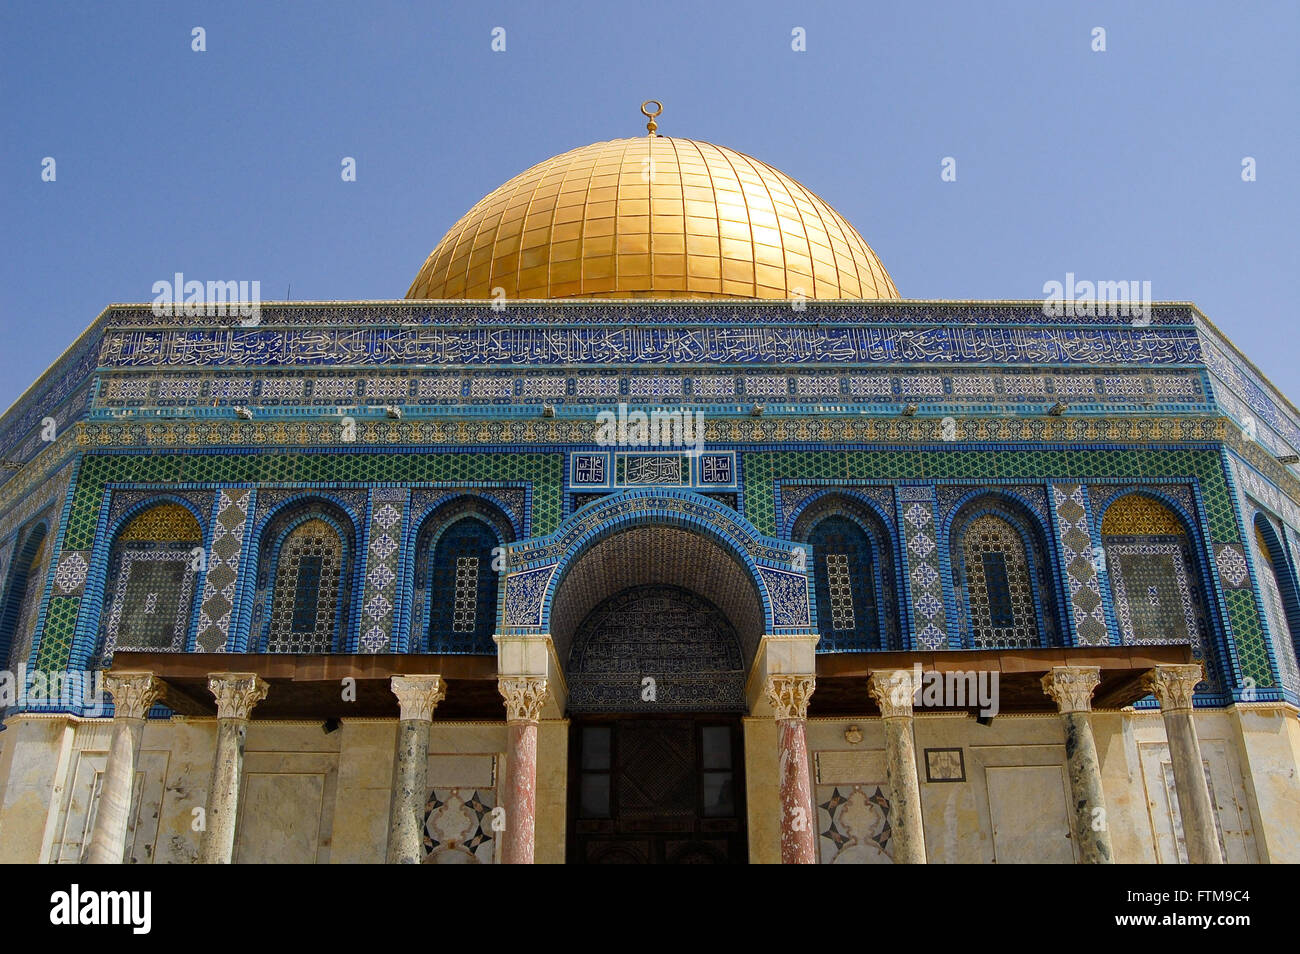 Great Mosque of Omar - Dome of the Rock in the Old City of Jerusalem Stock Photo